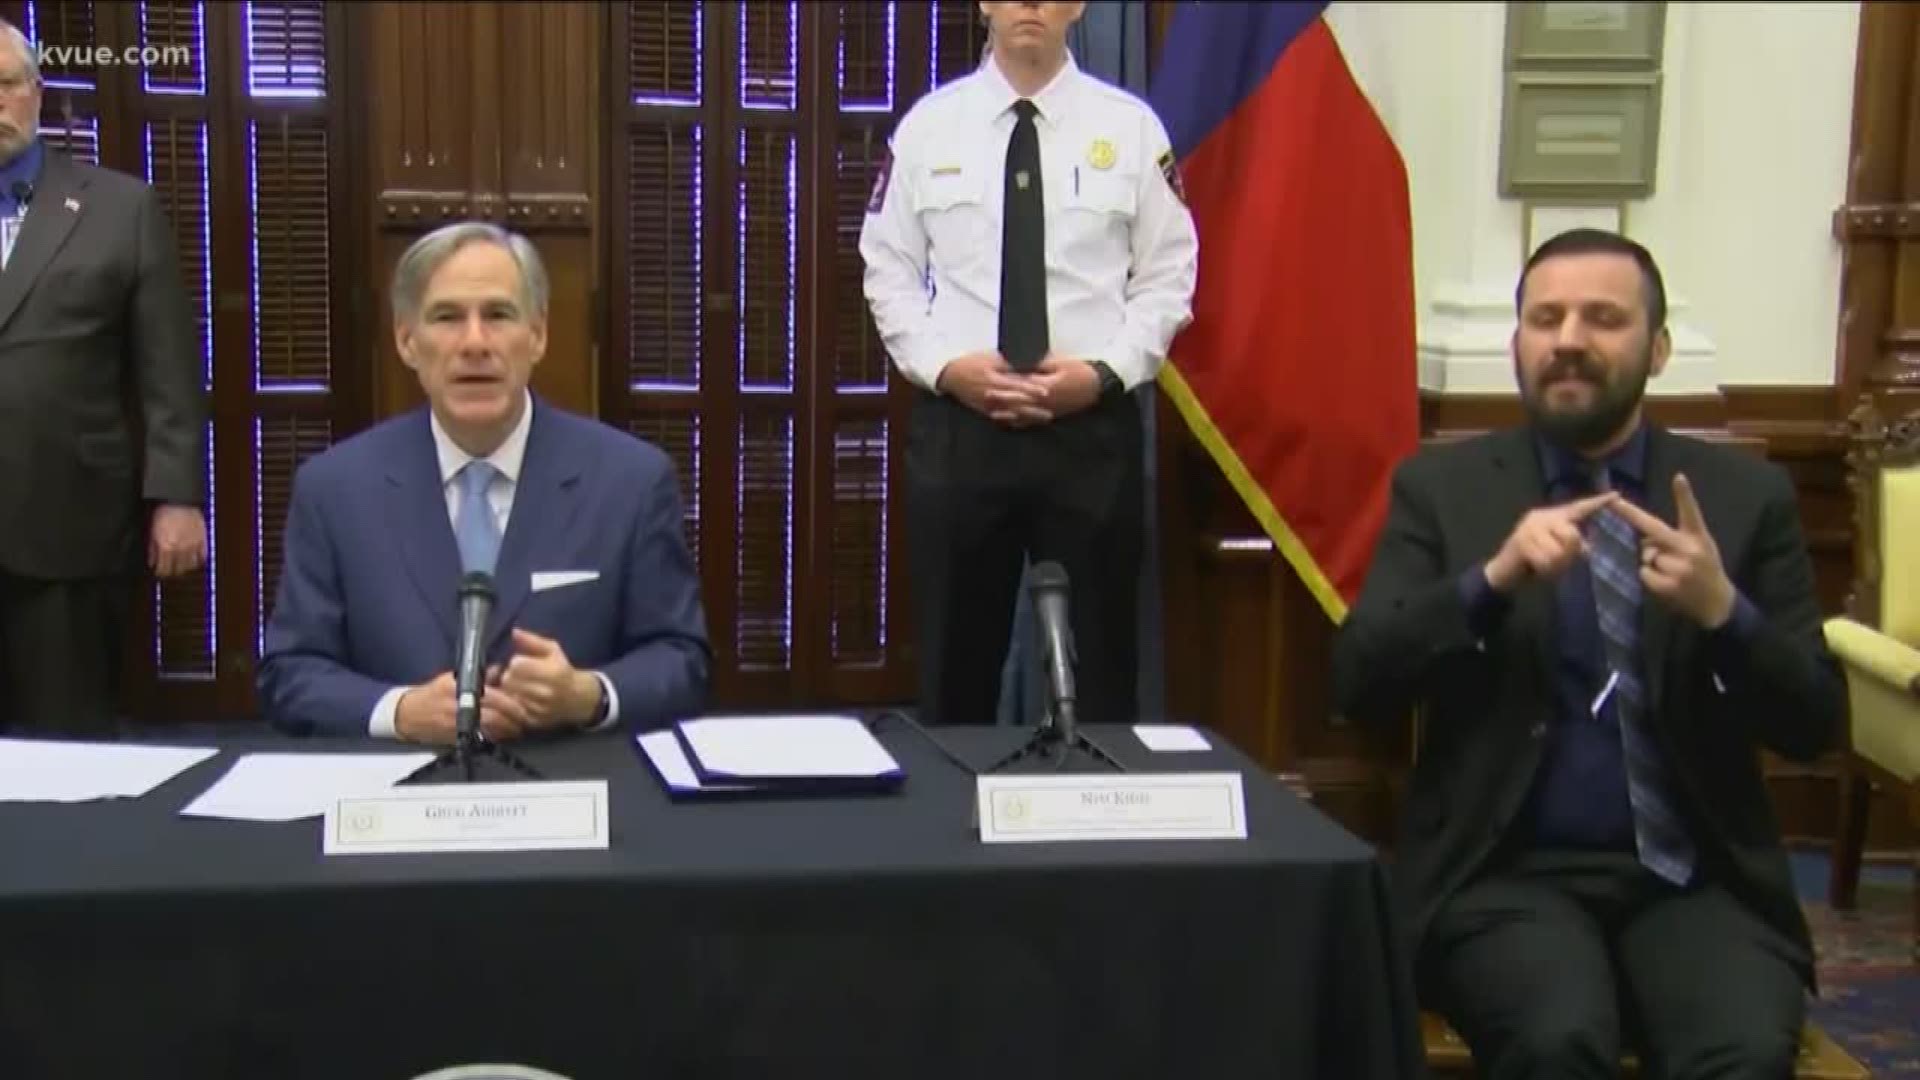 Abbott said part of the reason is the size of Texas.